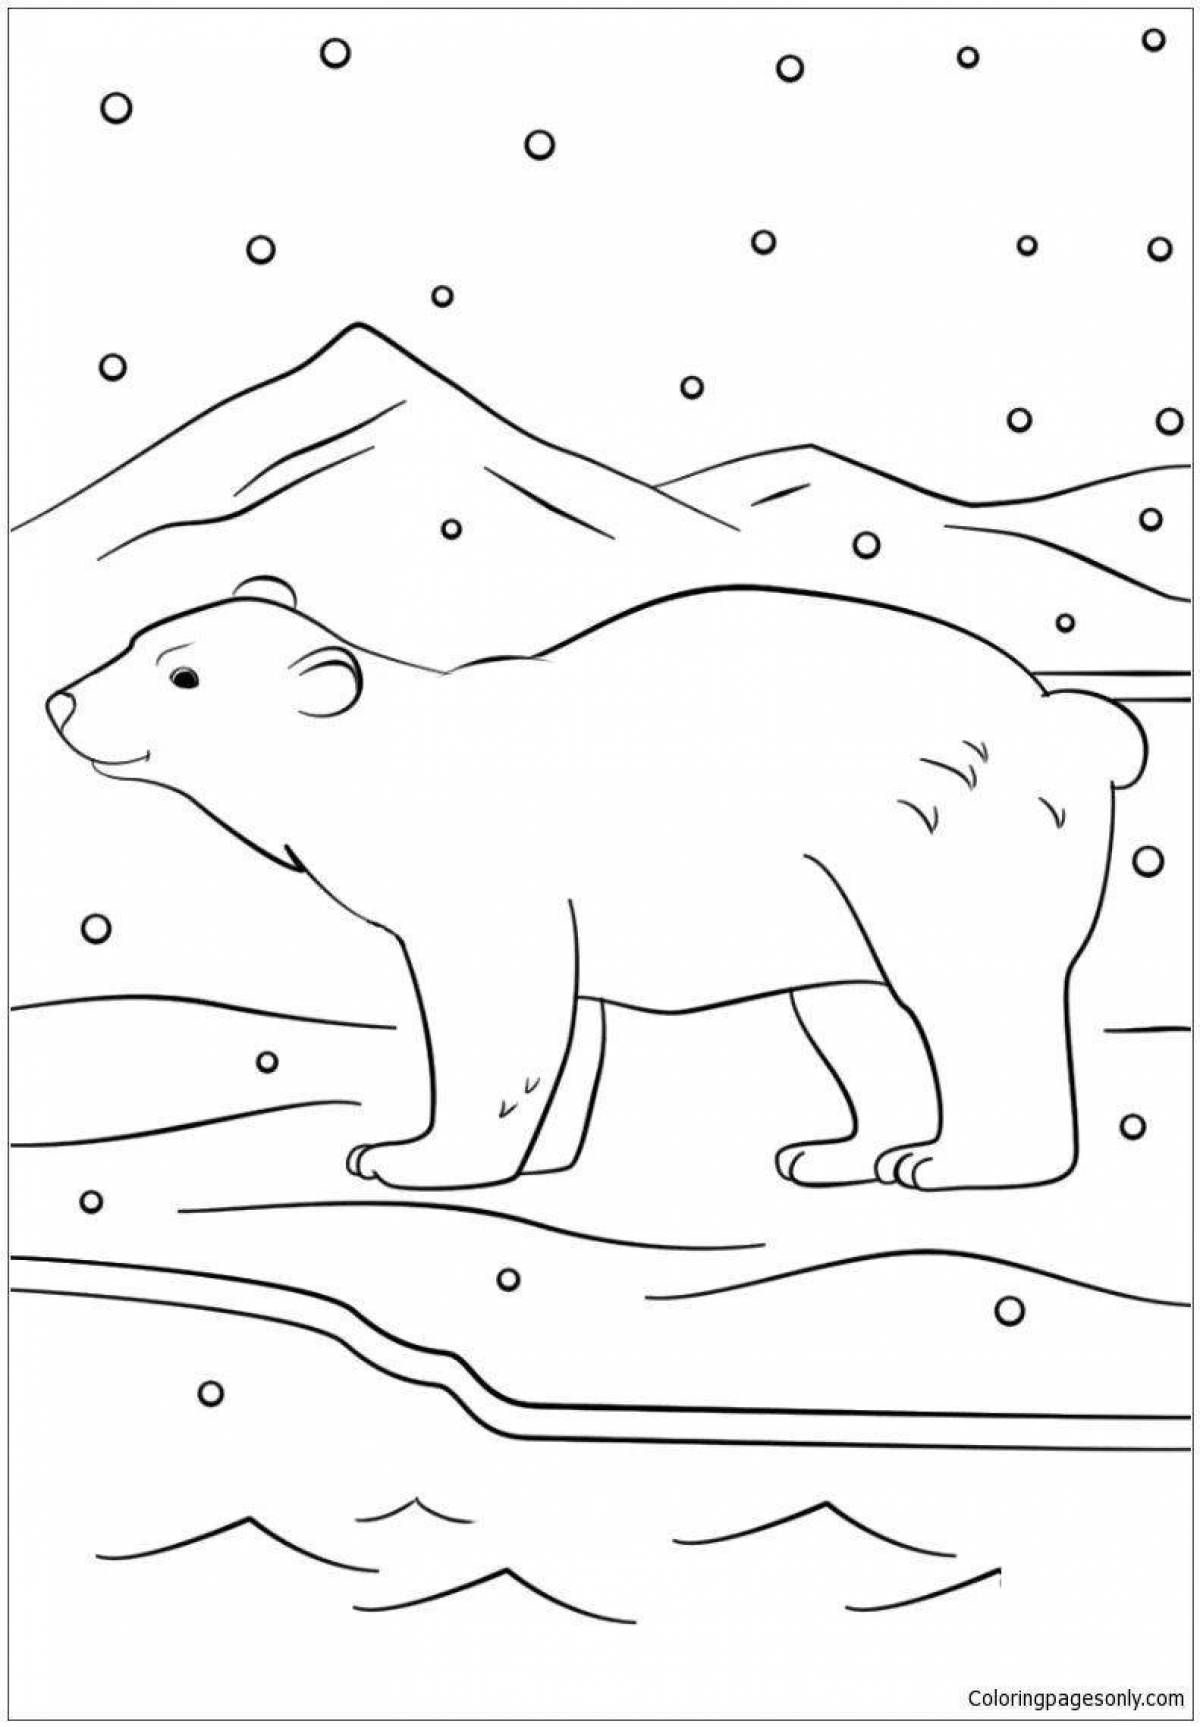 Fancy coloring for children 4-5 years old animals of the north